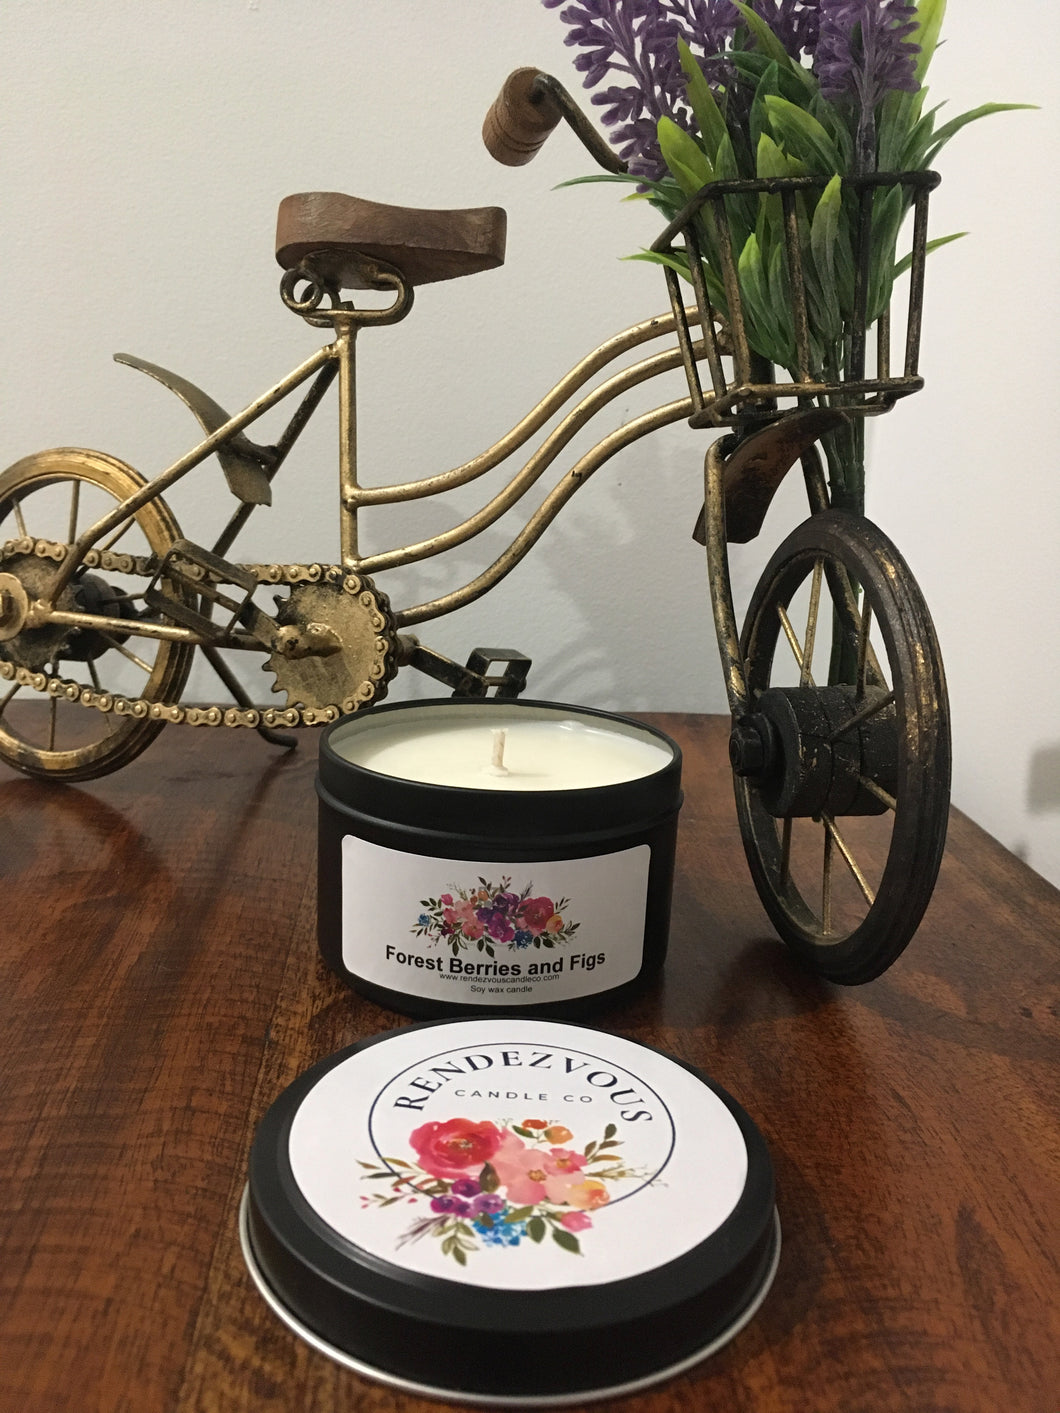 Forest Berries and Figs Scented Soy Candle